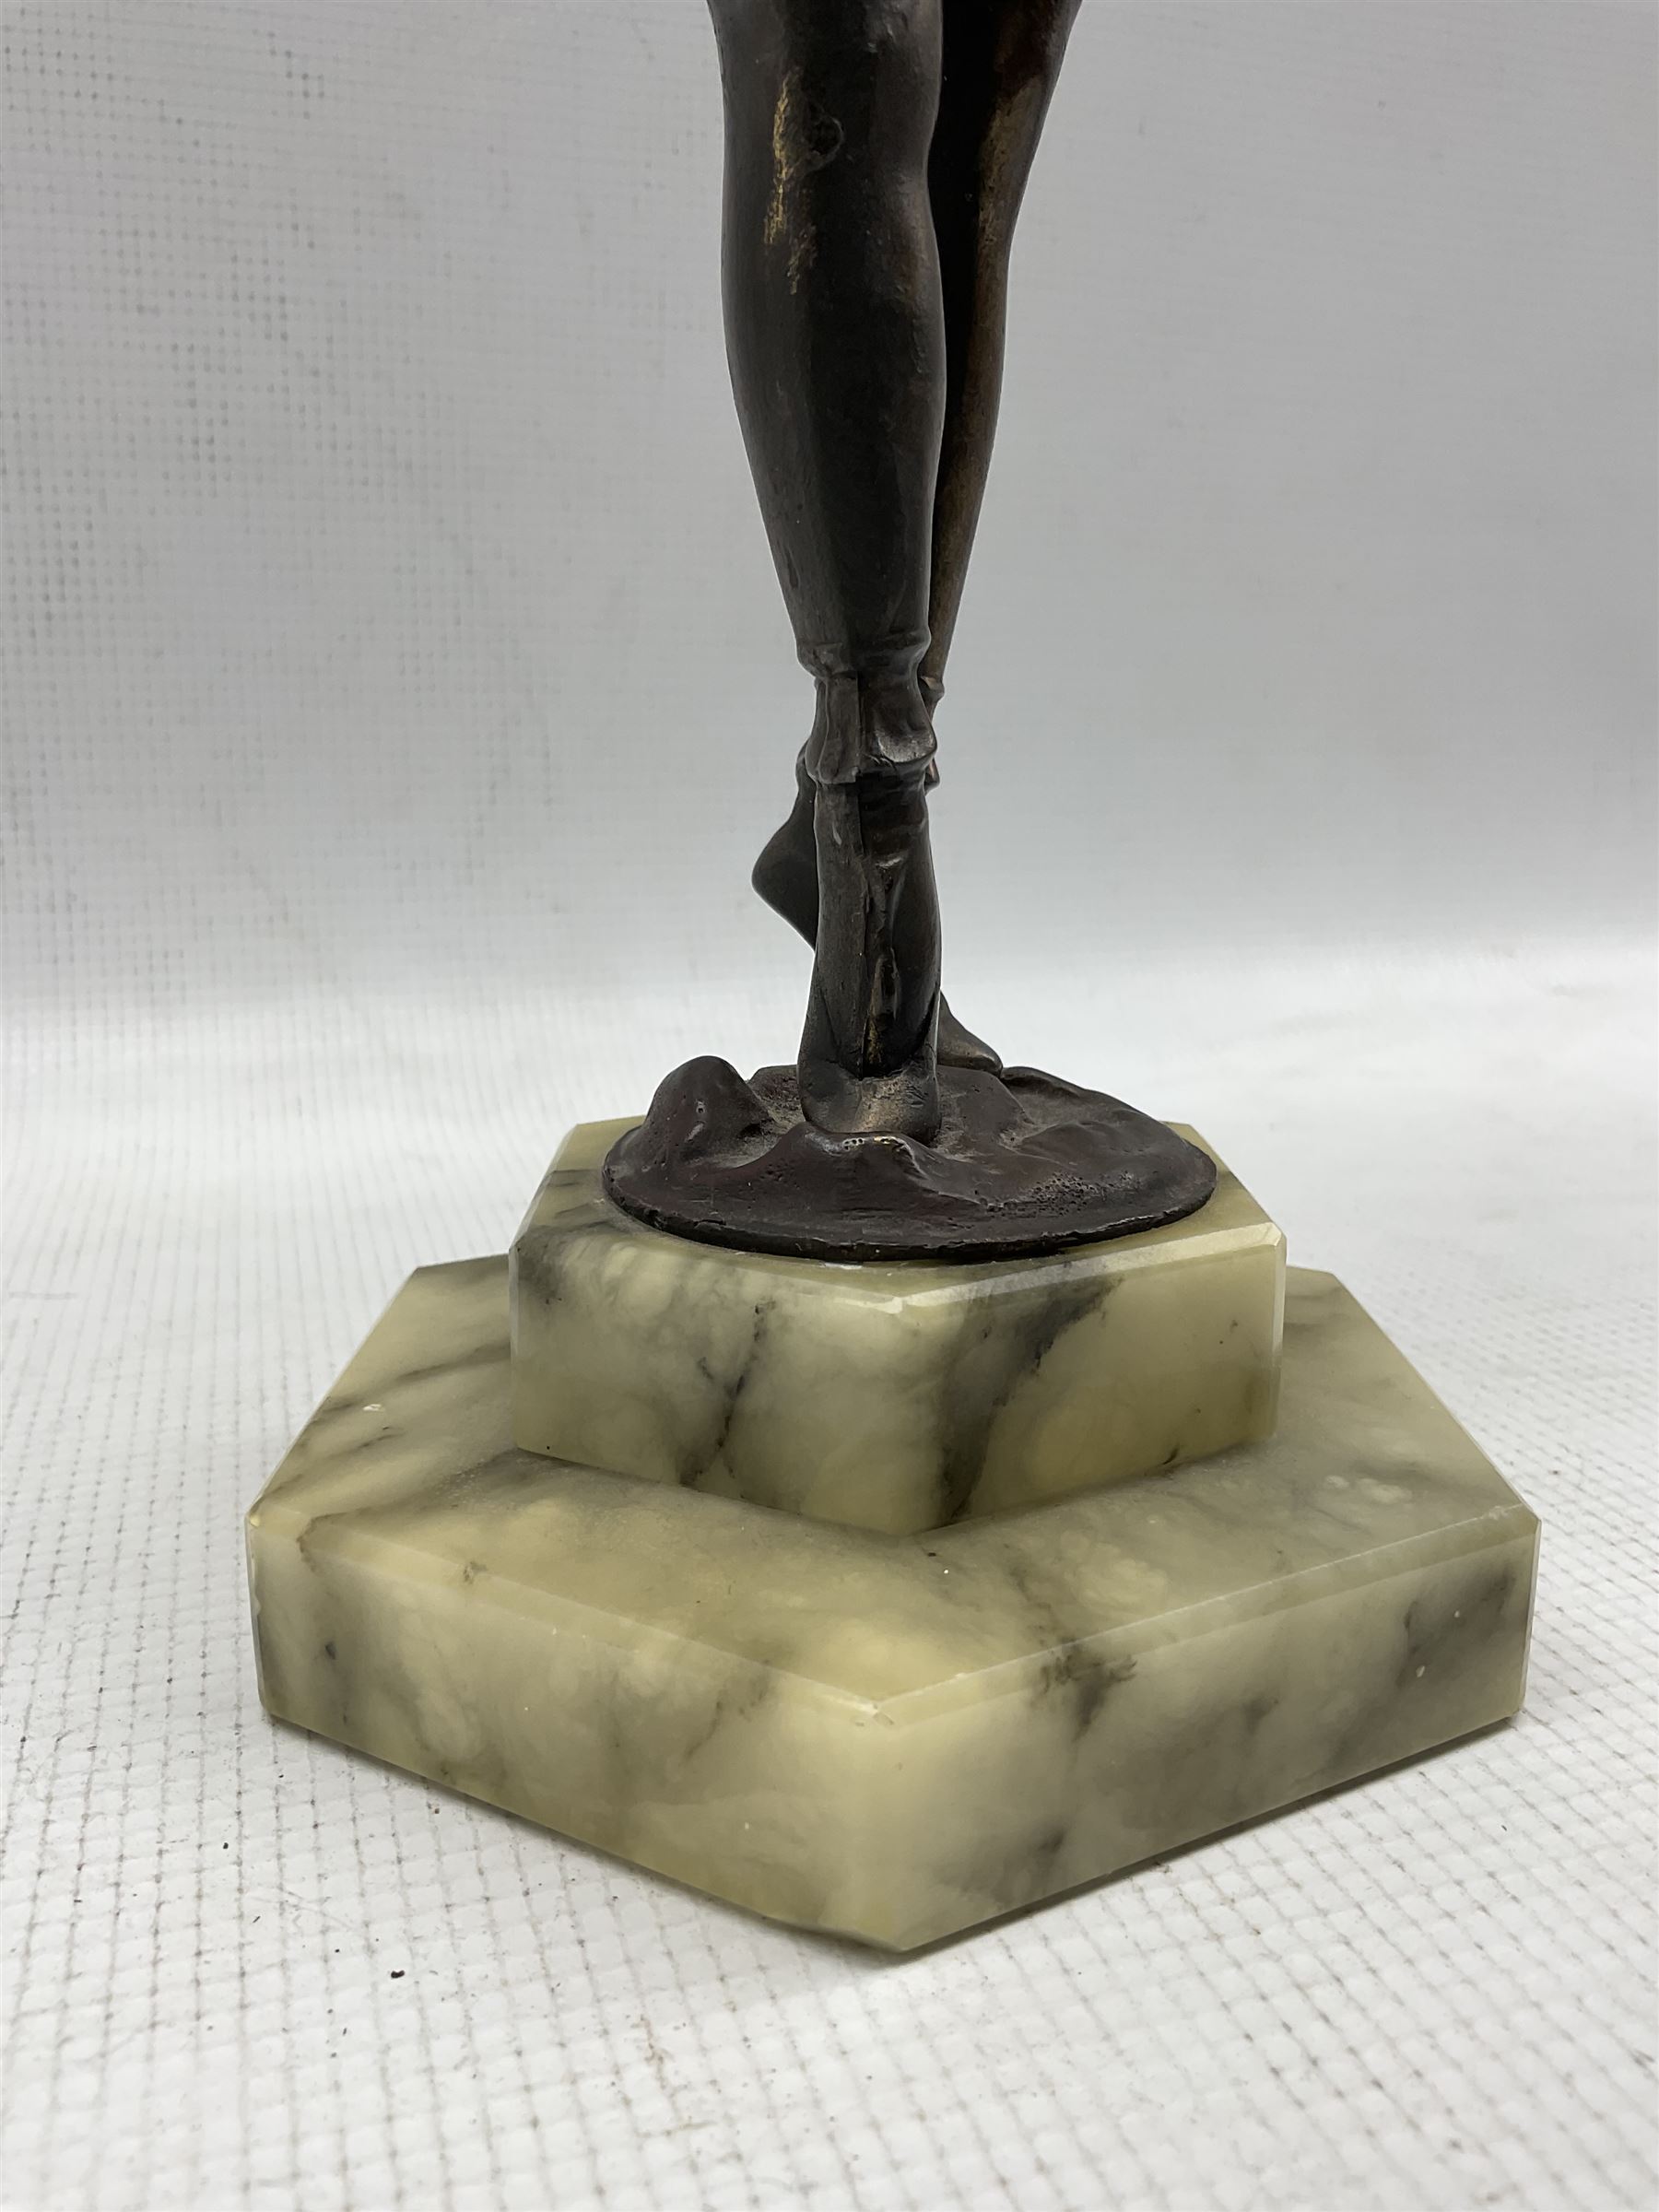 Art Deco style bronzed figure of a clown mounted on an onyx plinth - Image 3 of 3